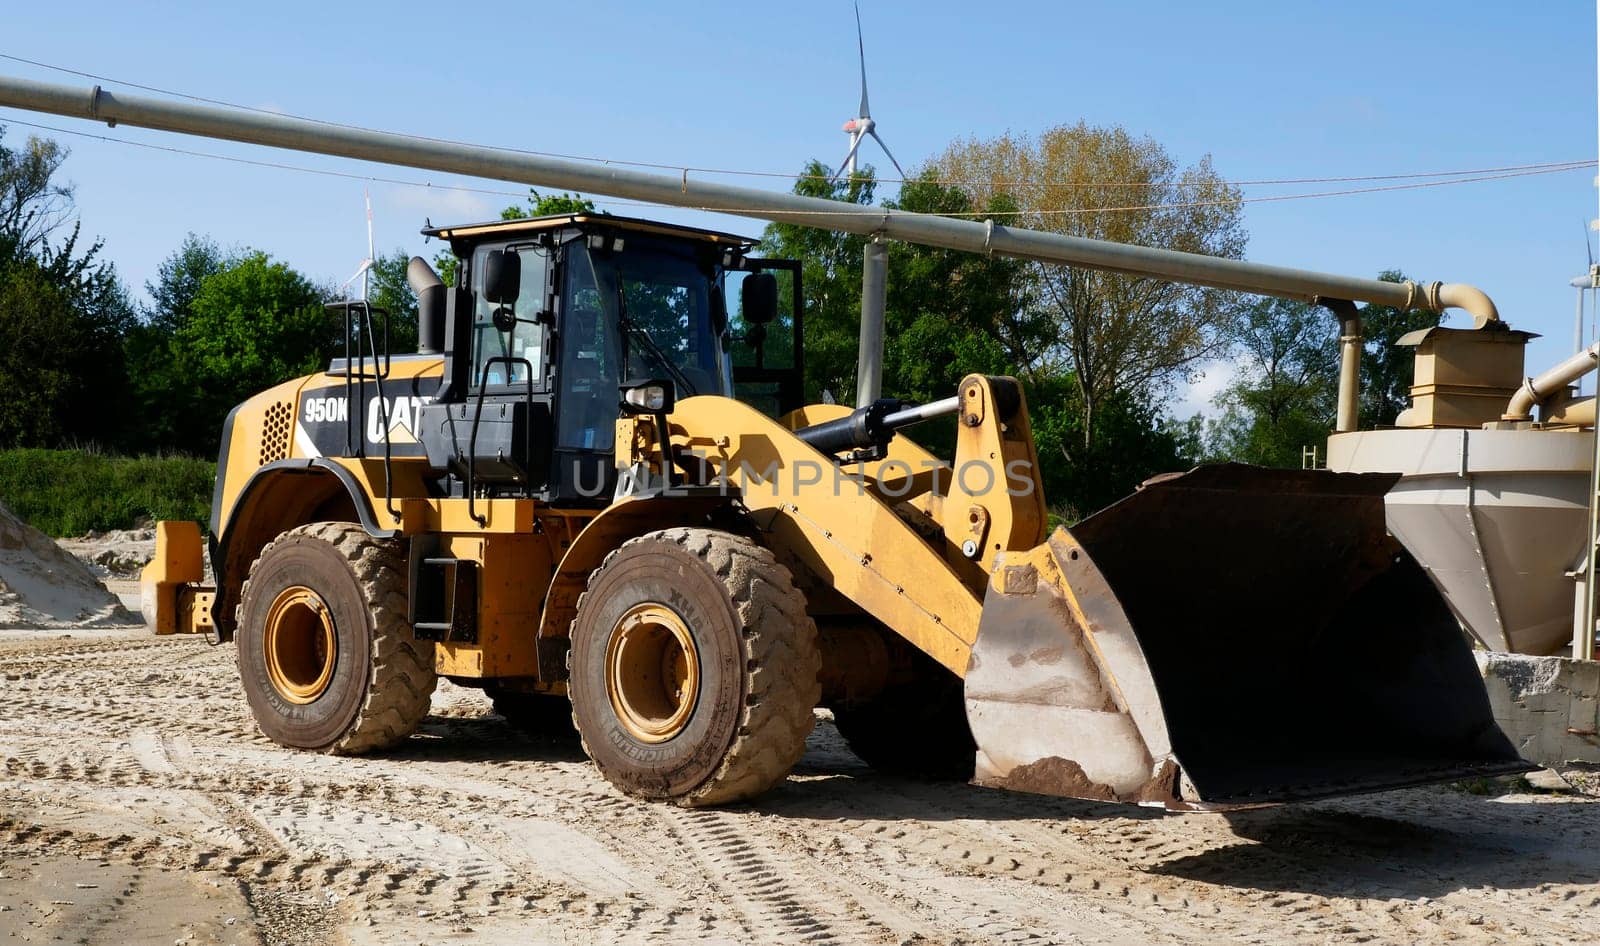 Hoogstede, Germany May 16 2023 A Caterpillar or CAT 950K wheel loader stands in the area of ​​a sand excavation